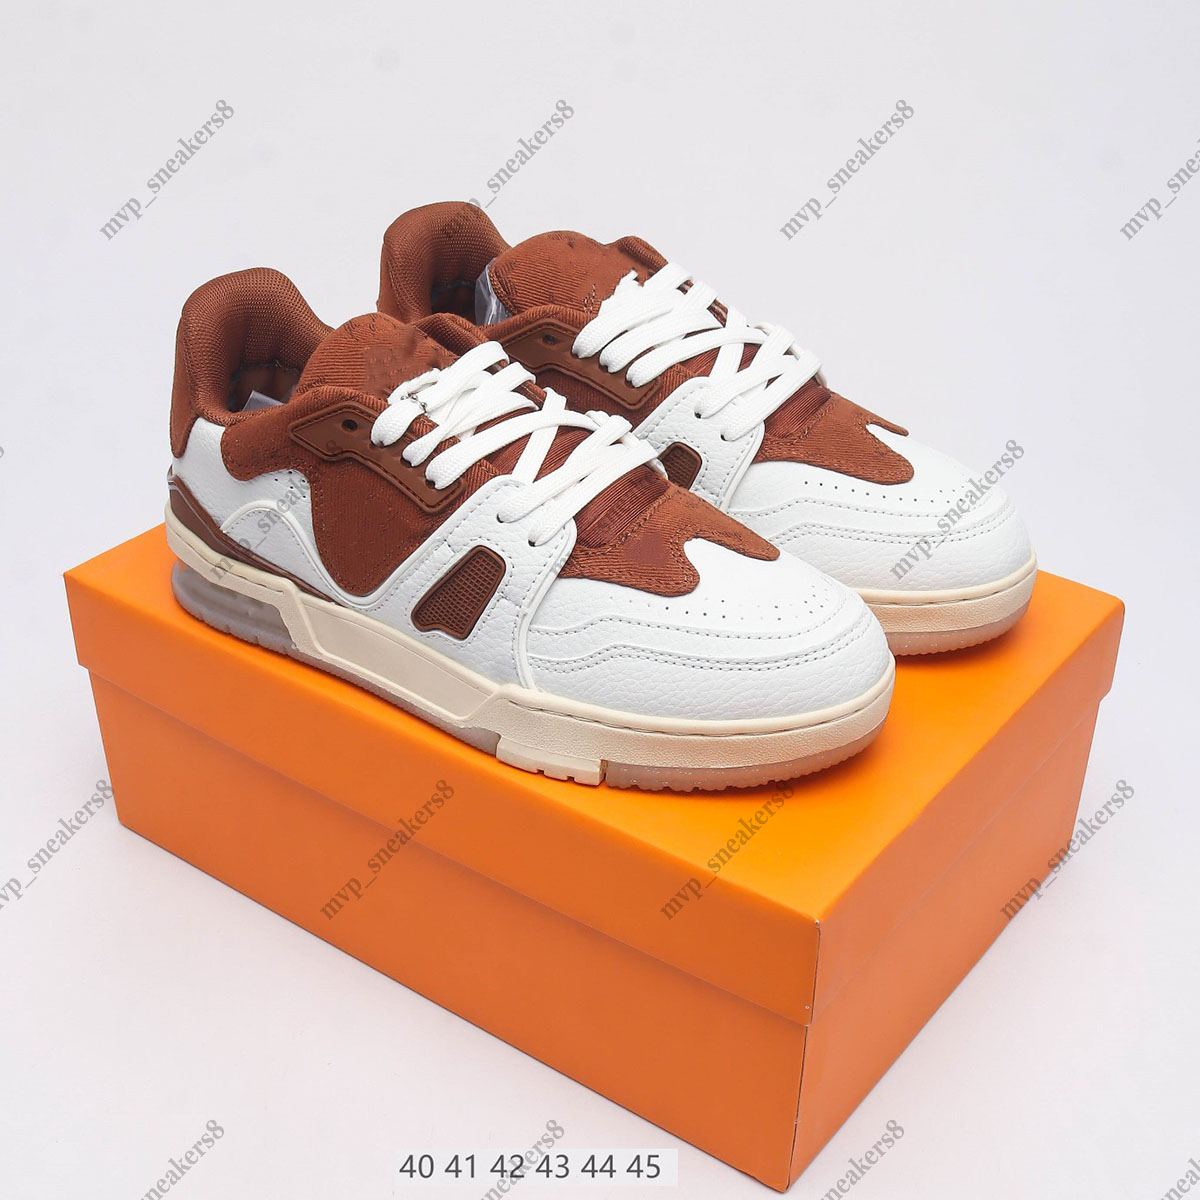 Sneakers Designer Shoes Casual Shoes Designer Sneakers Classic Vintage TRAINER Leather mesh with box sizes 35-45 for men and women canvas gebuine laether mesh